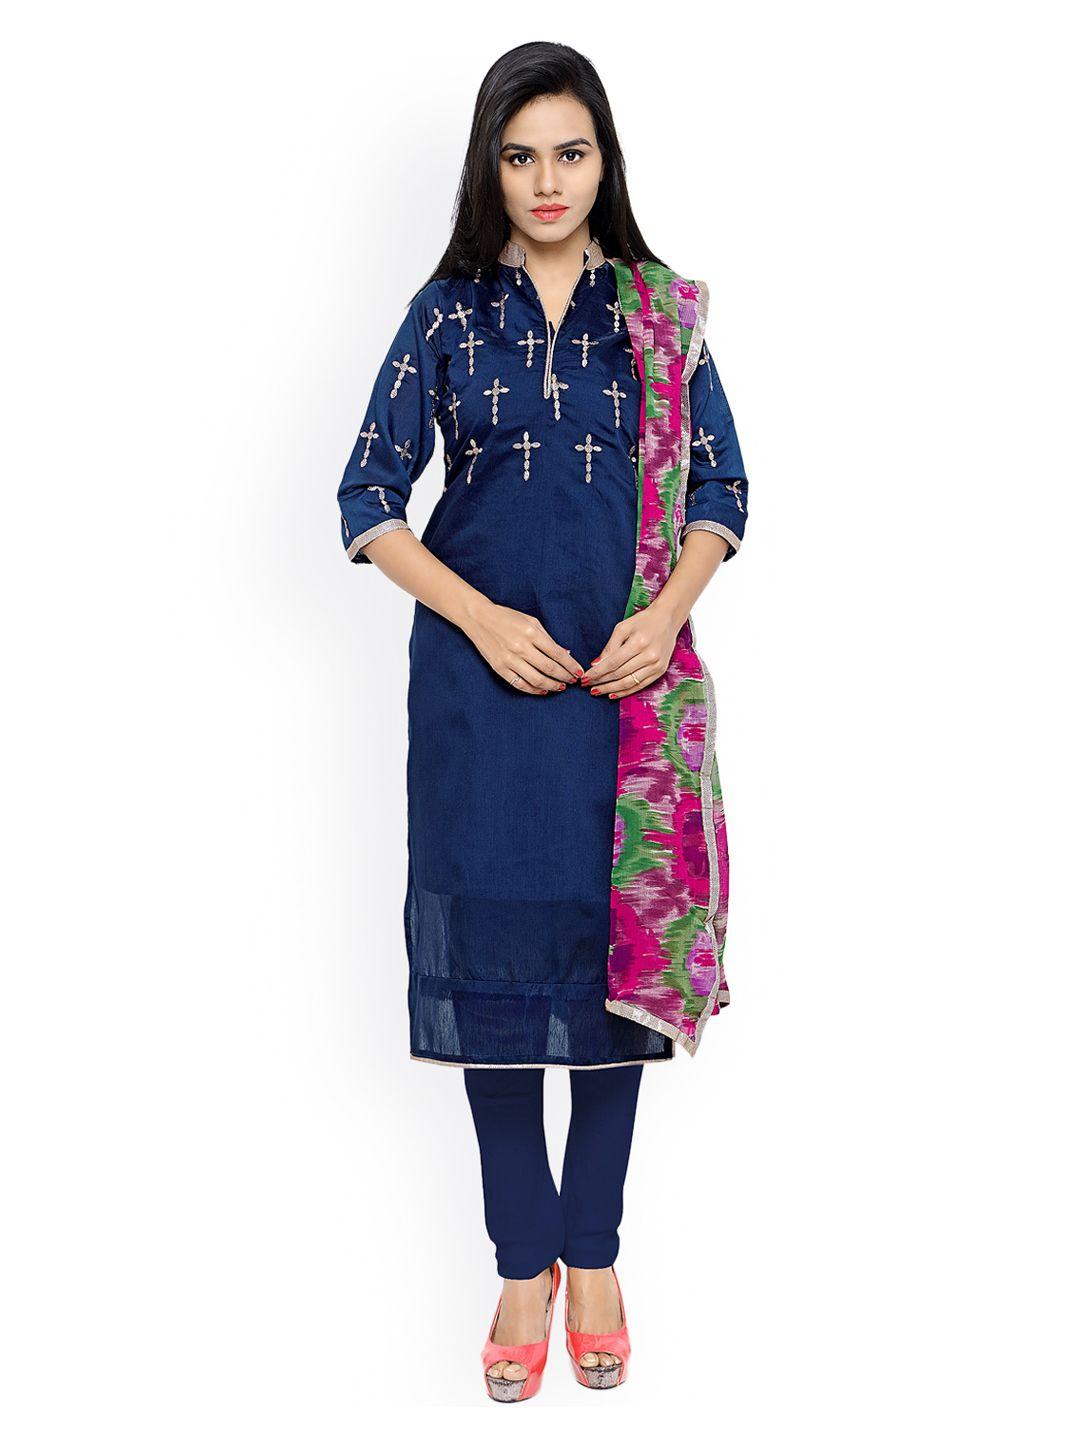 saree-mall-navy-&-pink-embroidered-chanderi-cotton-unstitched-dress-material